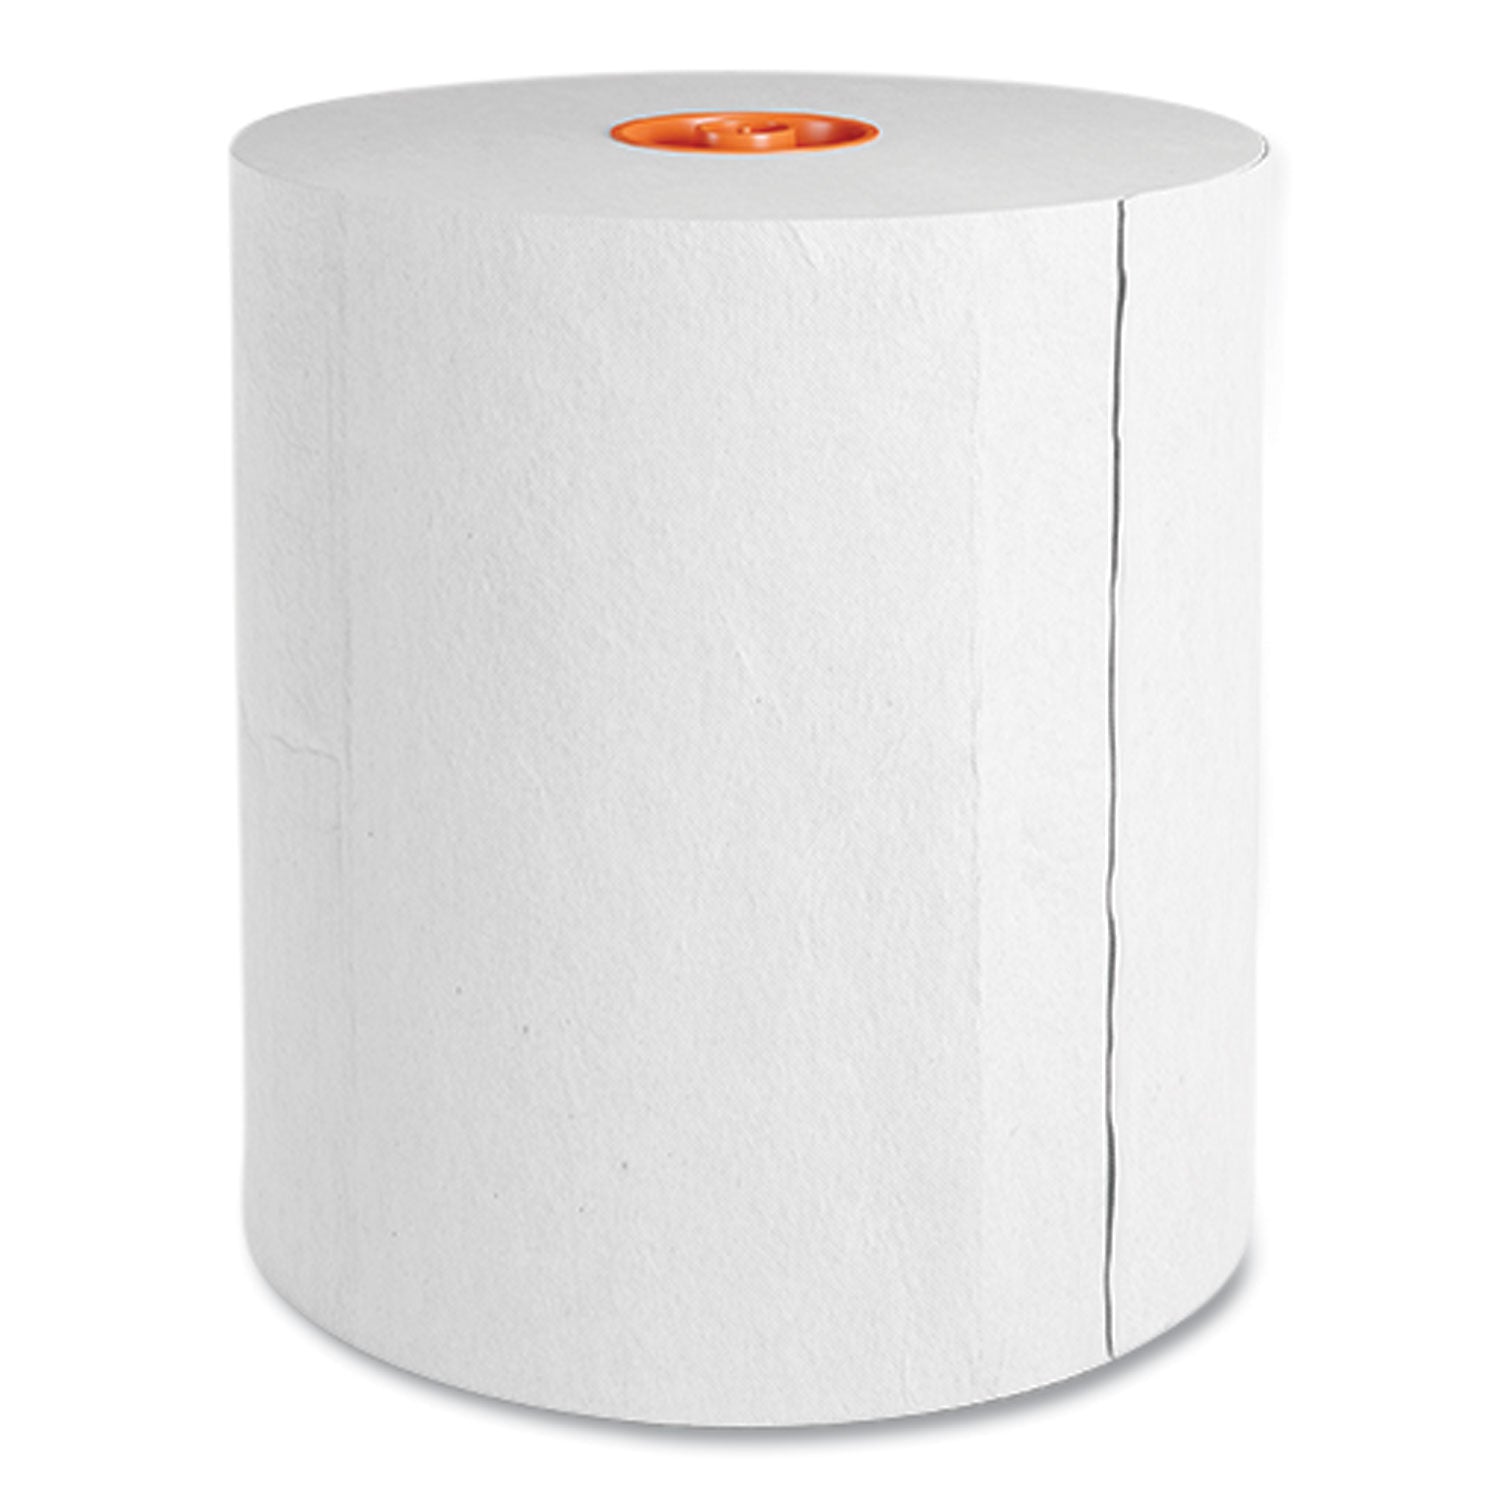 j-series-hardwound-paper-towels-1-ply-8-x-800-ft-white-6-rolls-carton_cwz24405976 - 3